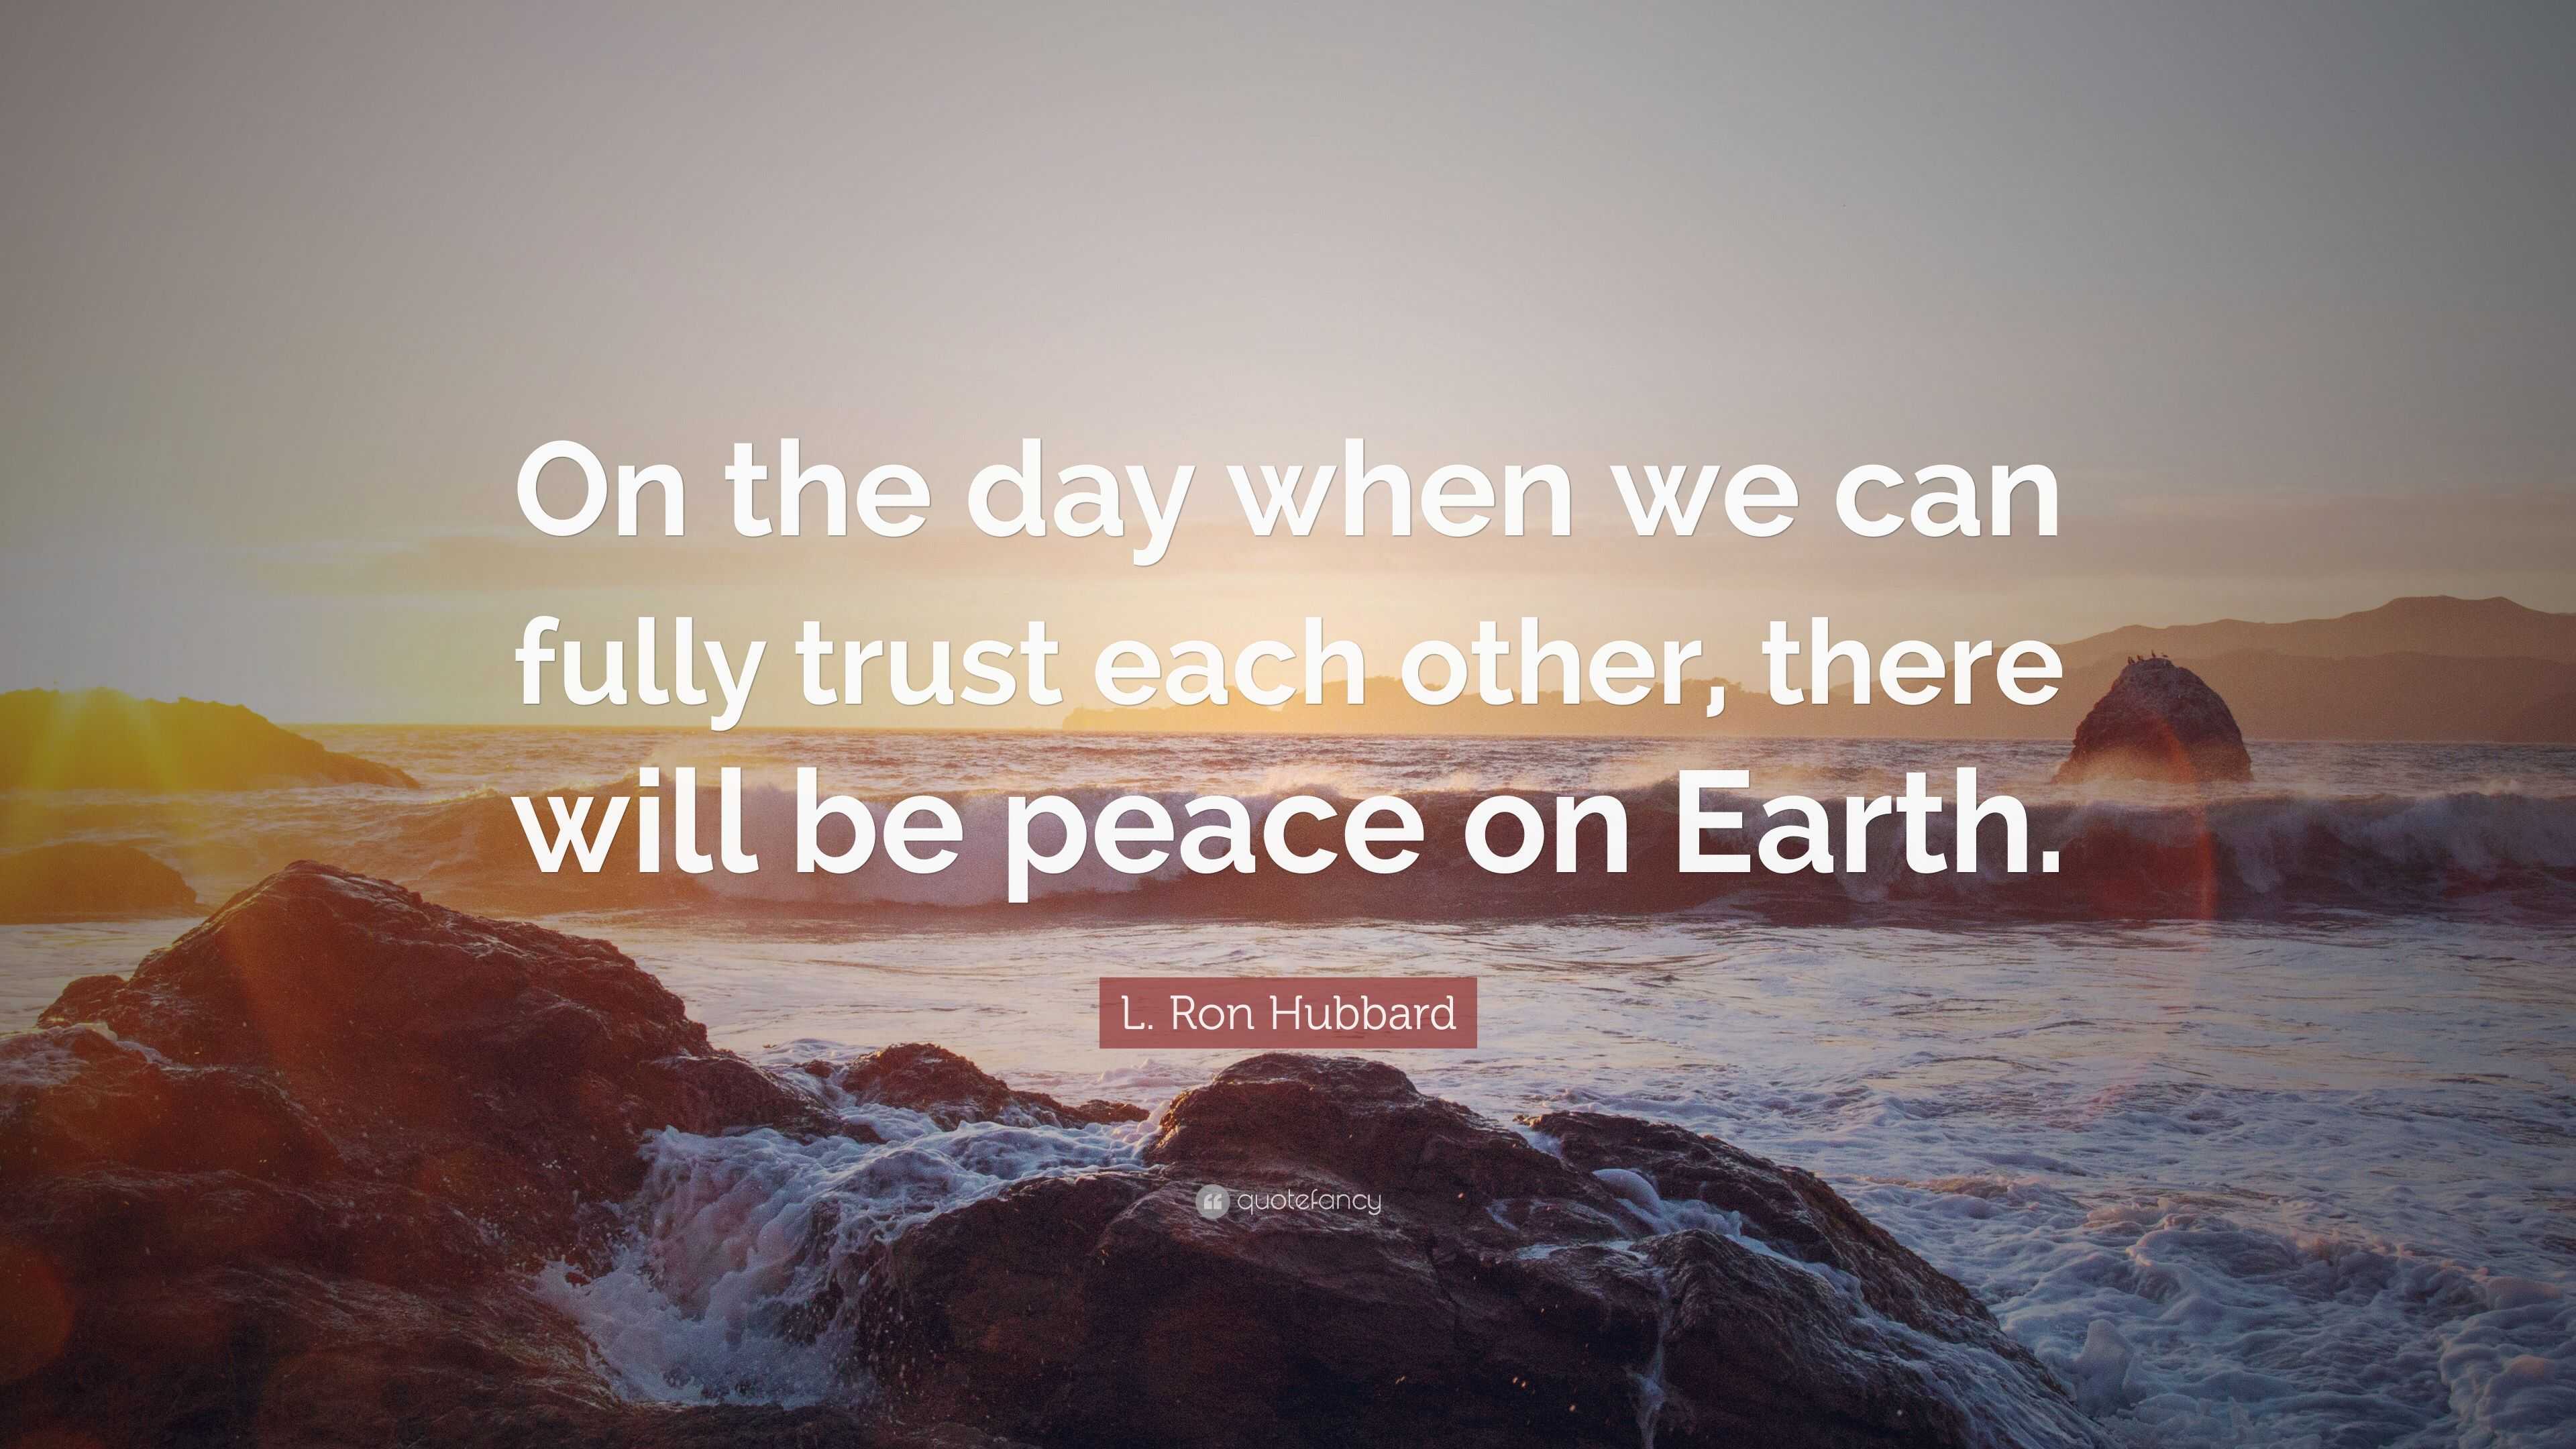 L. Ron Hubbard Quote: “On the day when we can fully trust each other ...